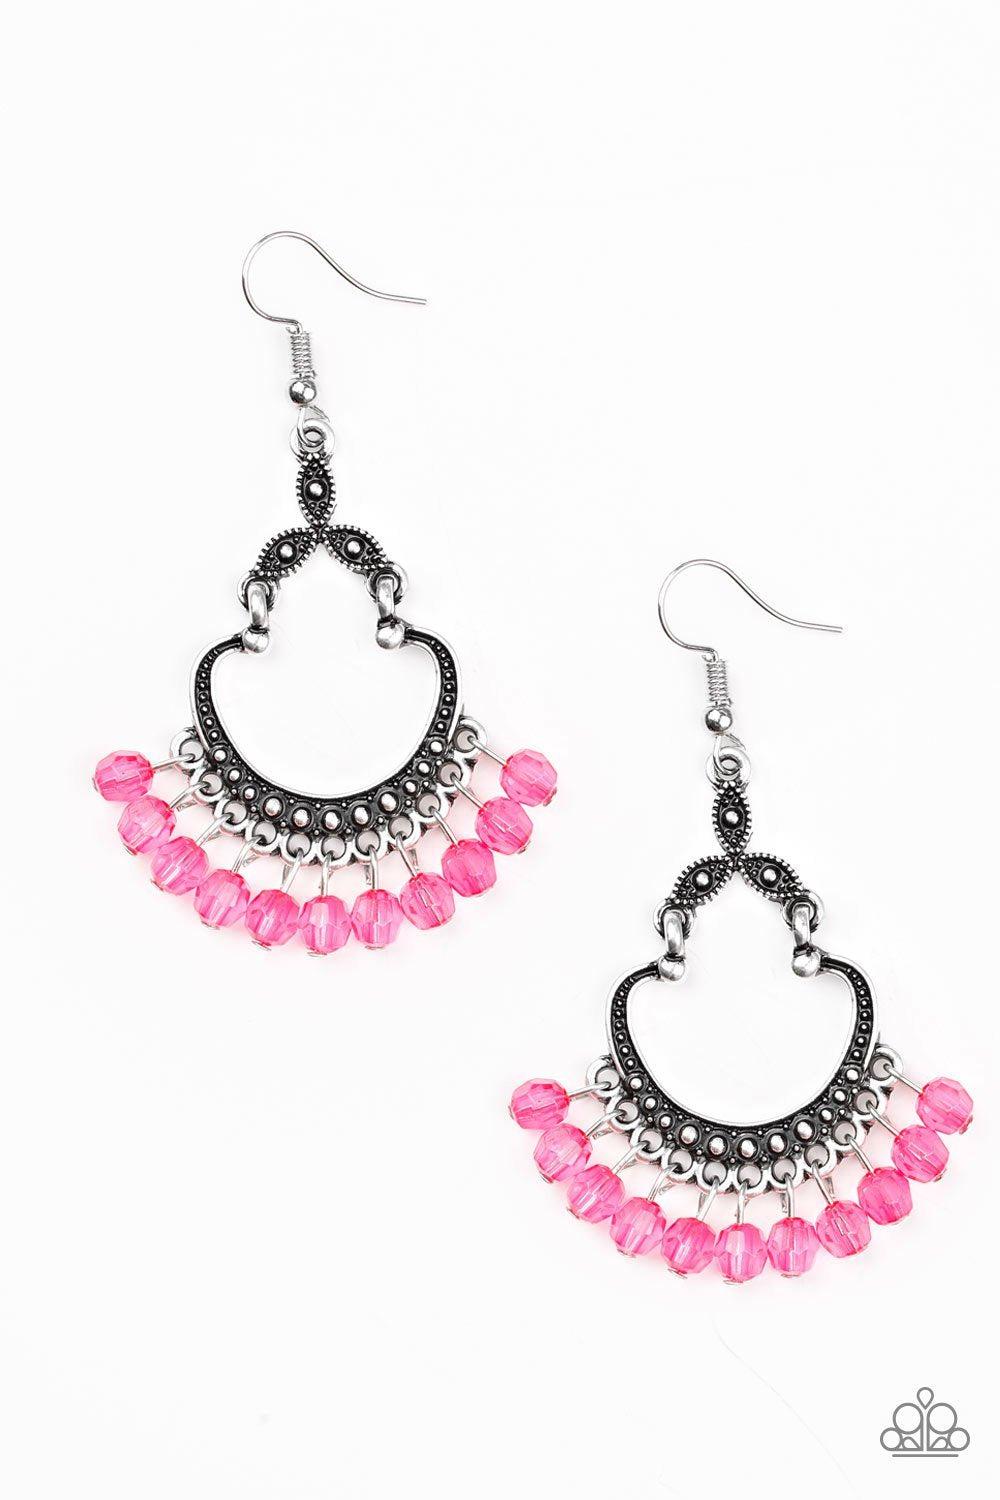 Babe Alert Pink Earrings - Paparazzi Accessories - lightbox -CarasShop.com - $5 Jewelry by Cara Jewels